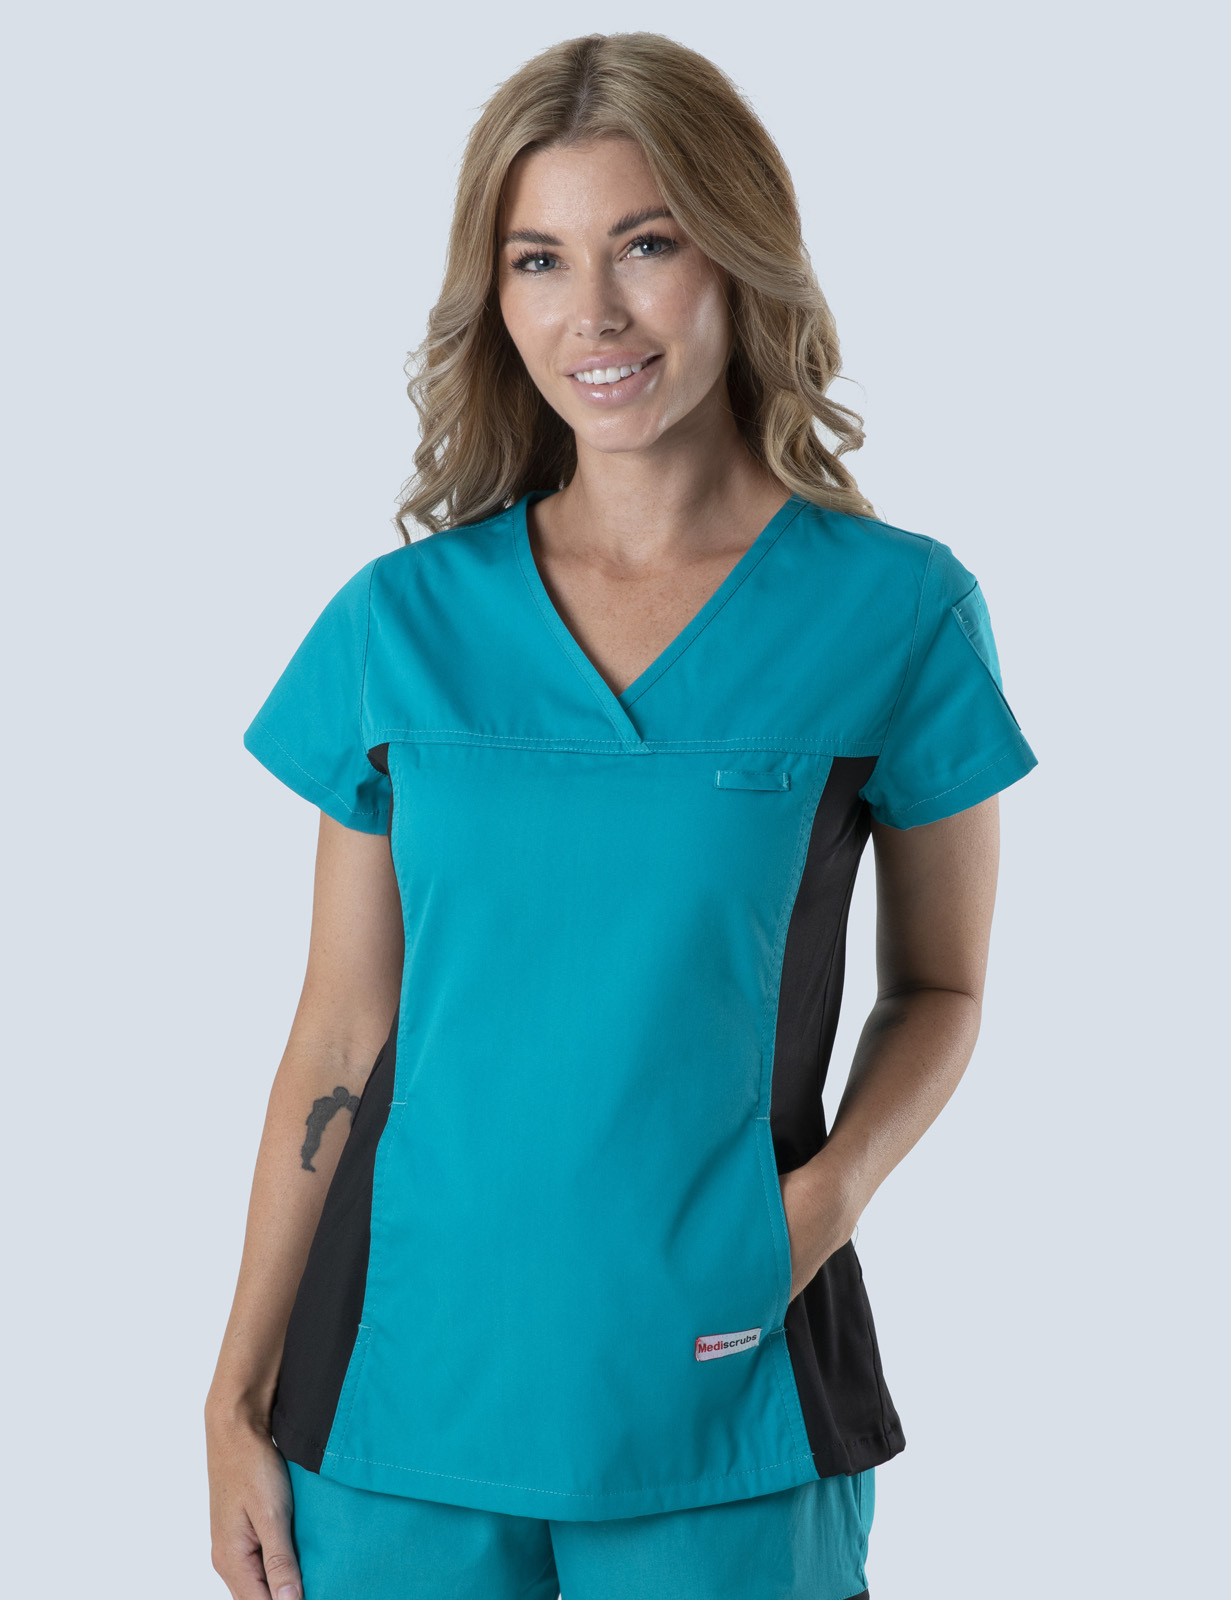 Women's Fit Solid Scrub Top With Spandex Panel - Teal - X Large